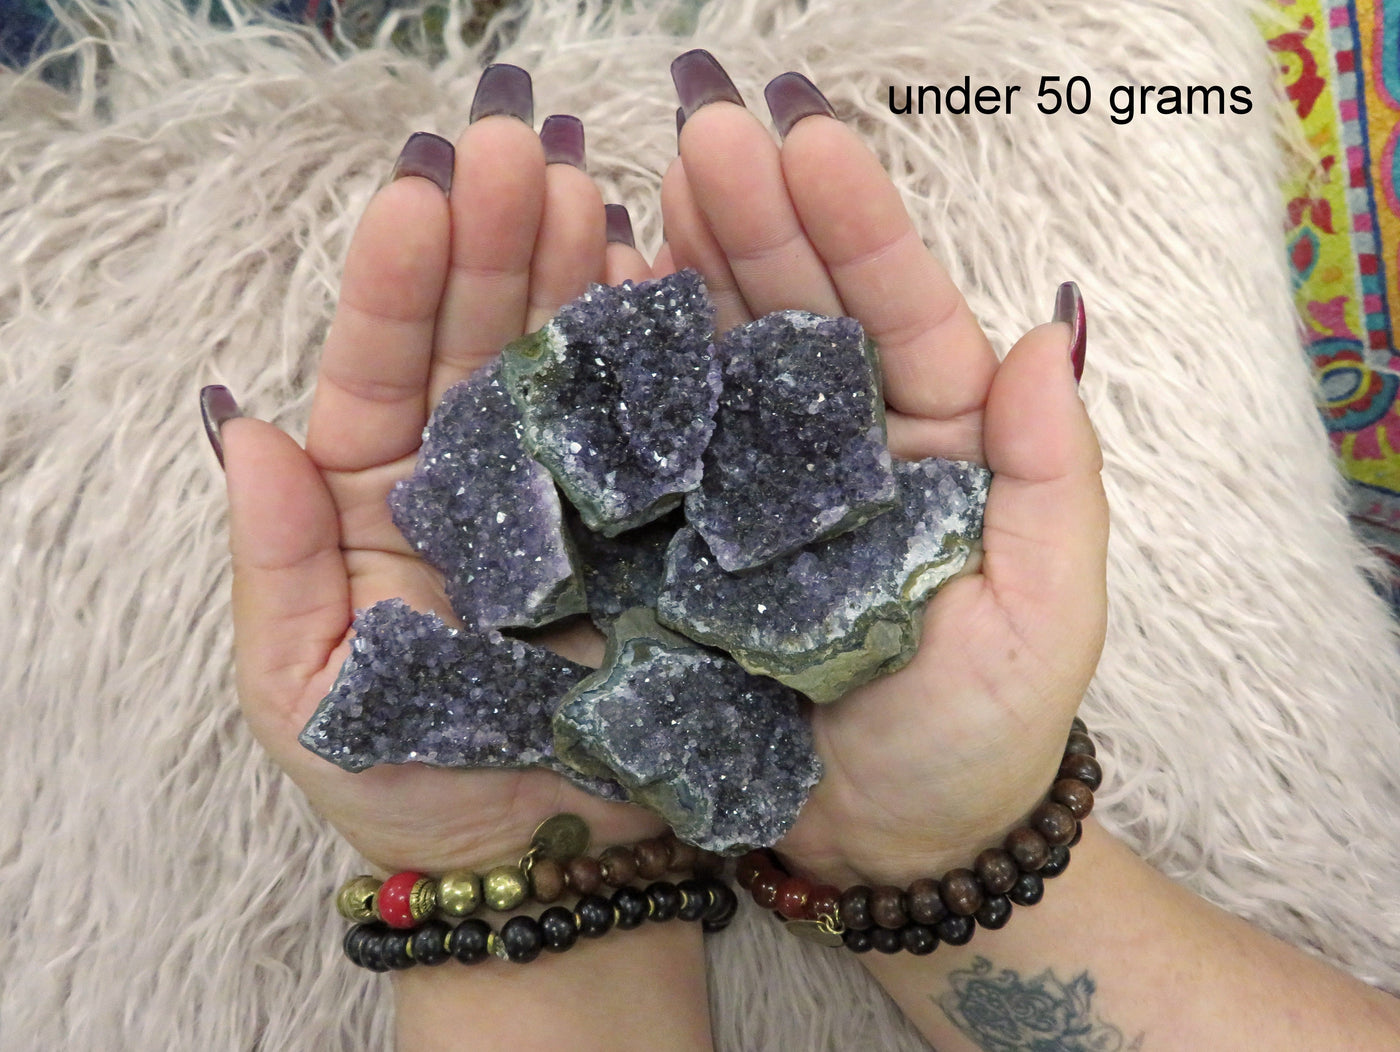 Multiple under 50 grams amethyst clusters are being held with both hands for size reference in this picture. 